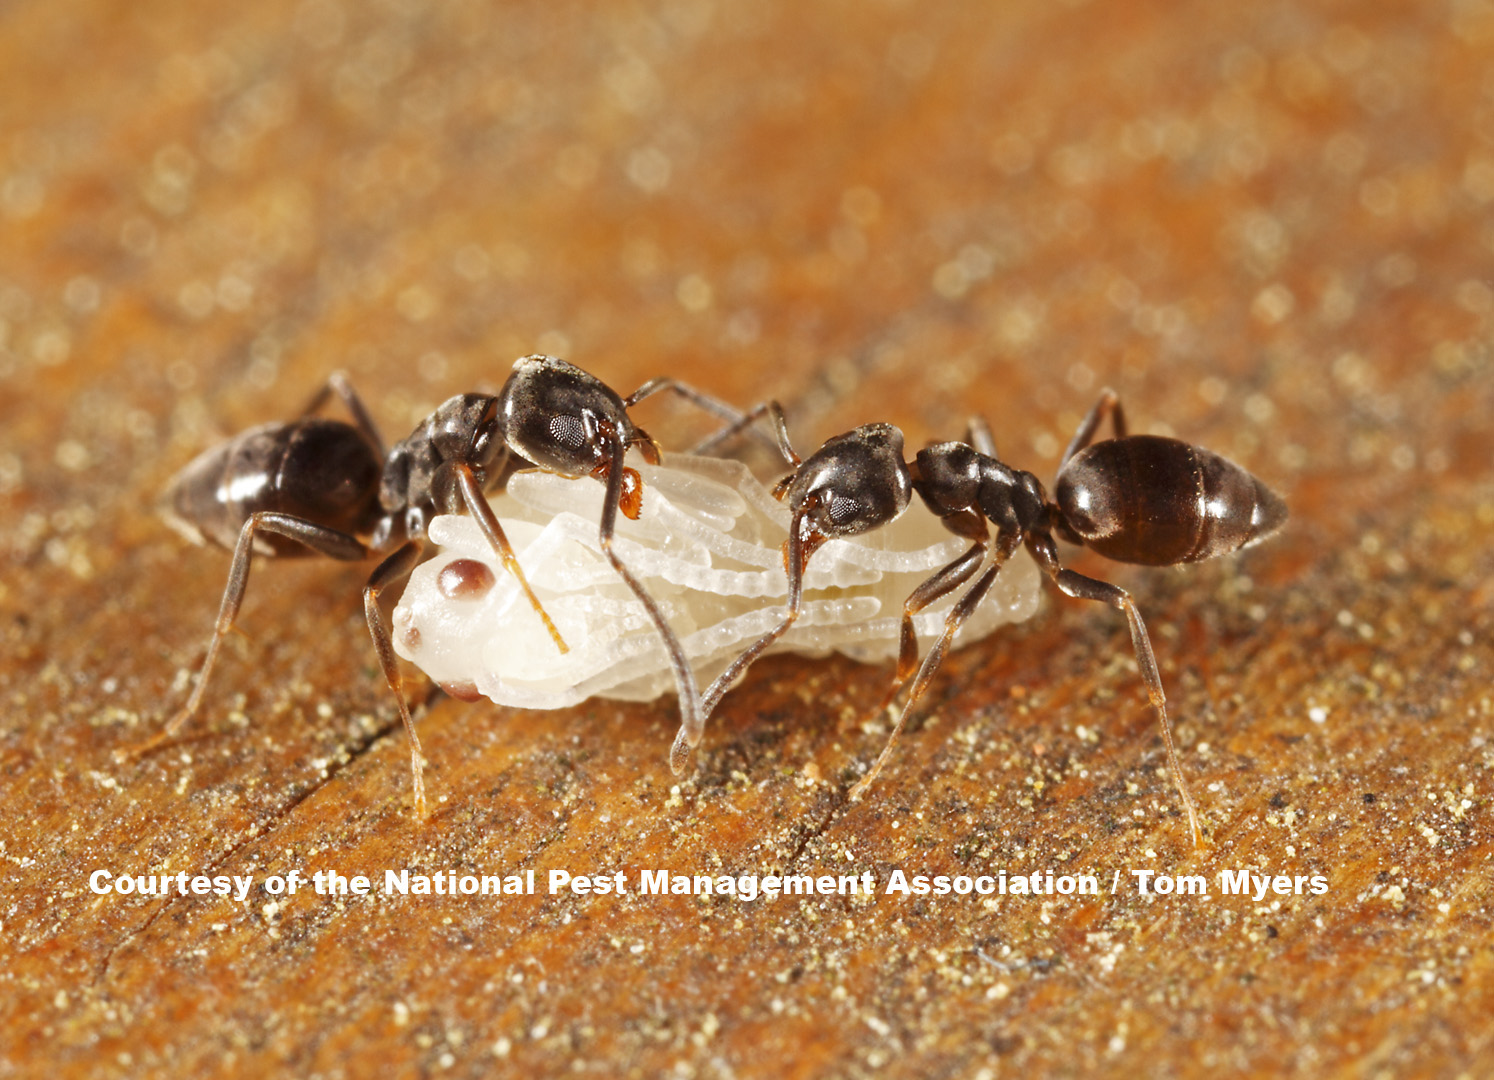 Odorous House Ant Information - Fun Ant Facts from PestWorld for Kids